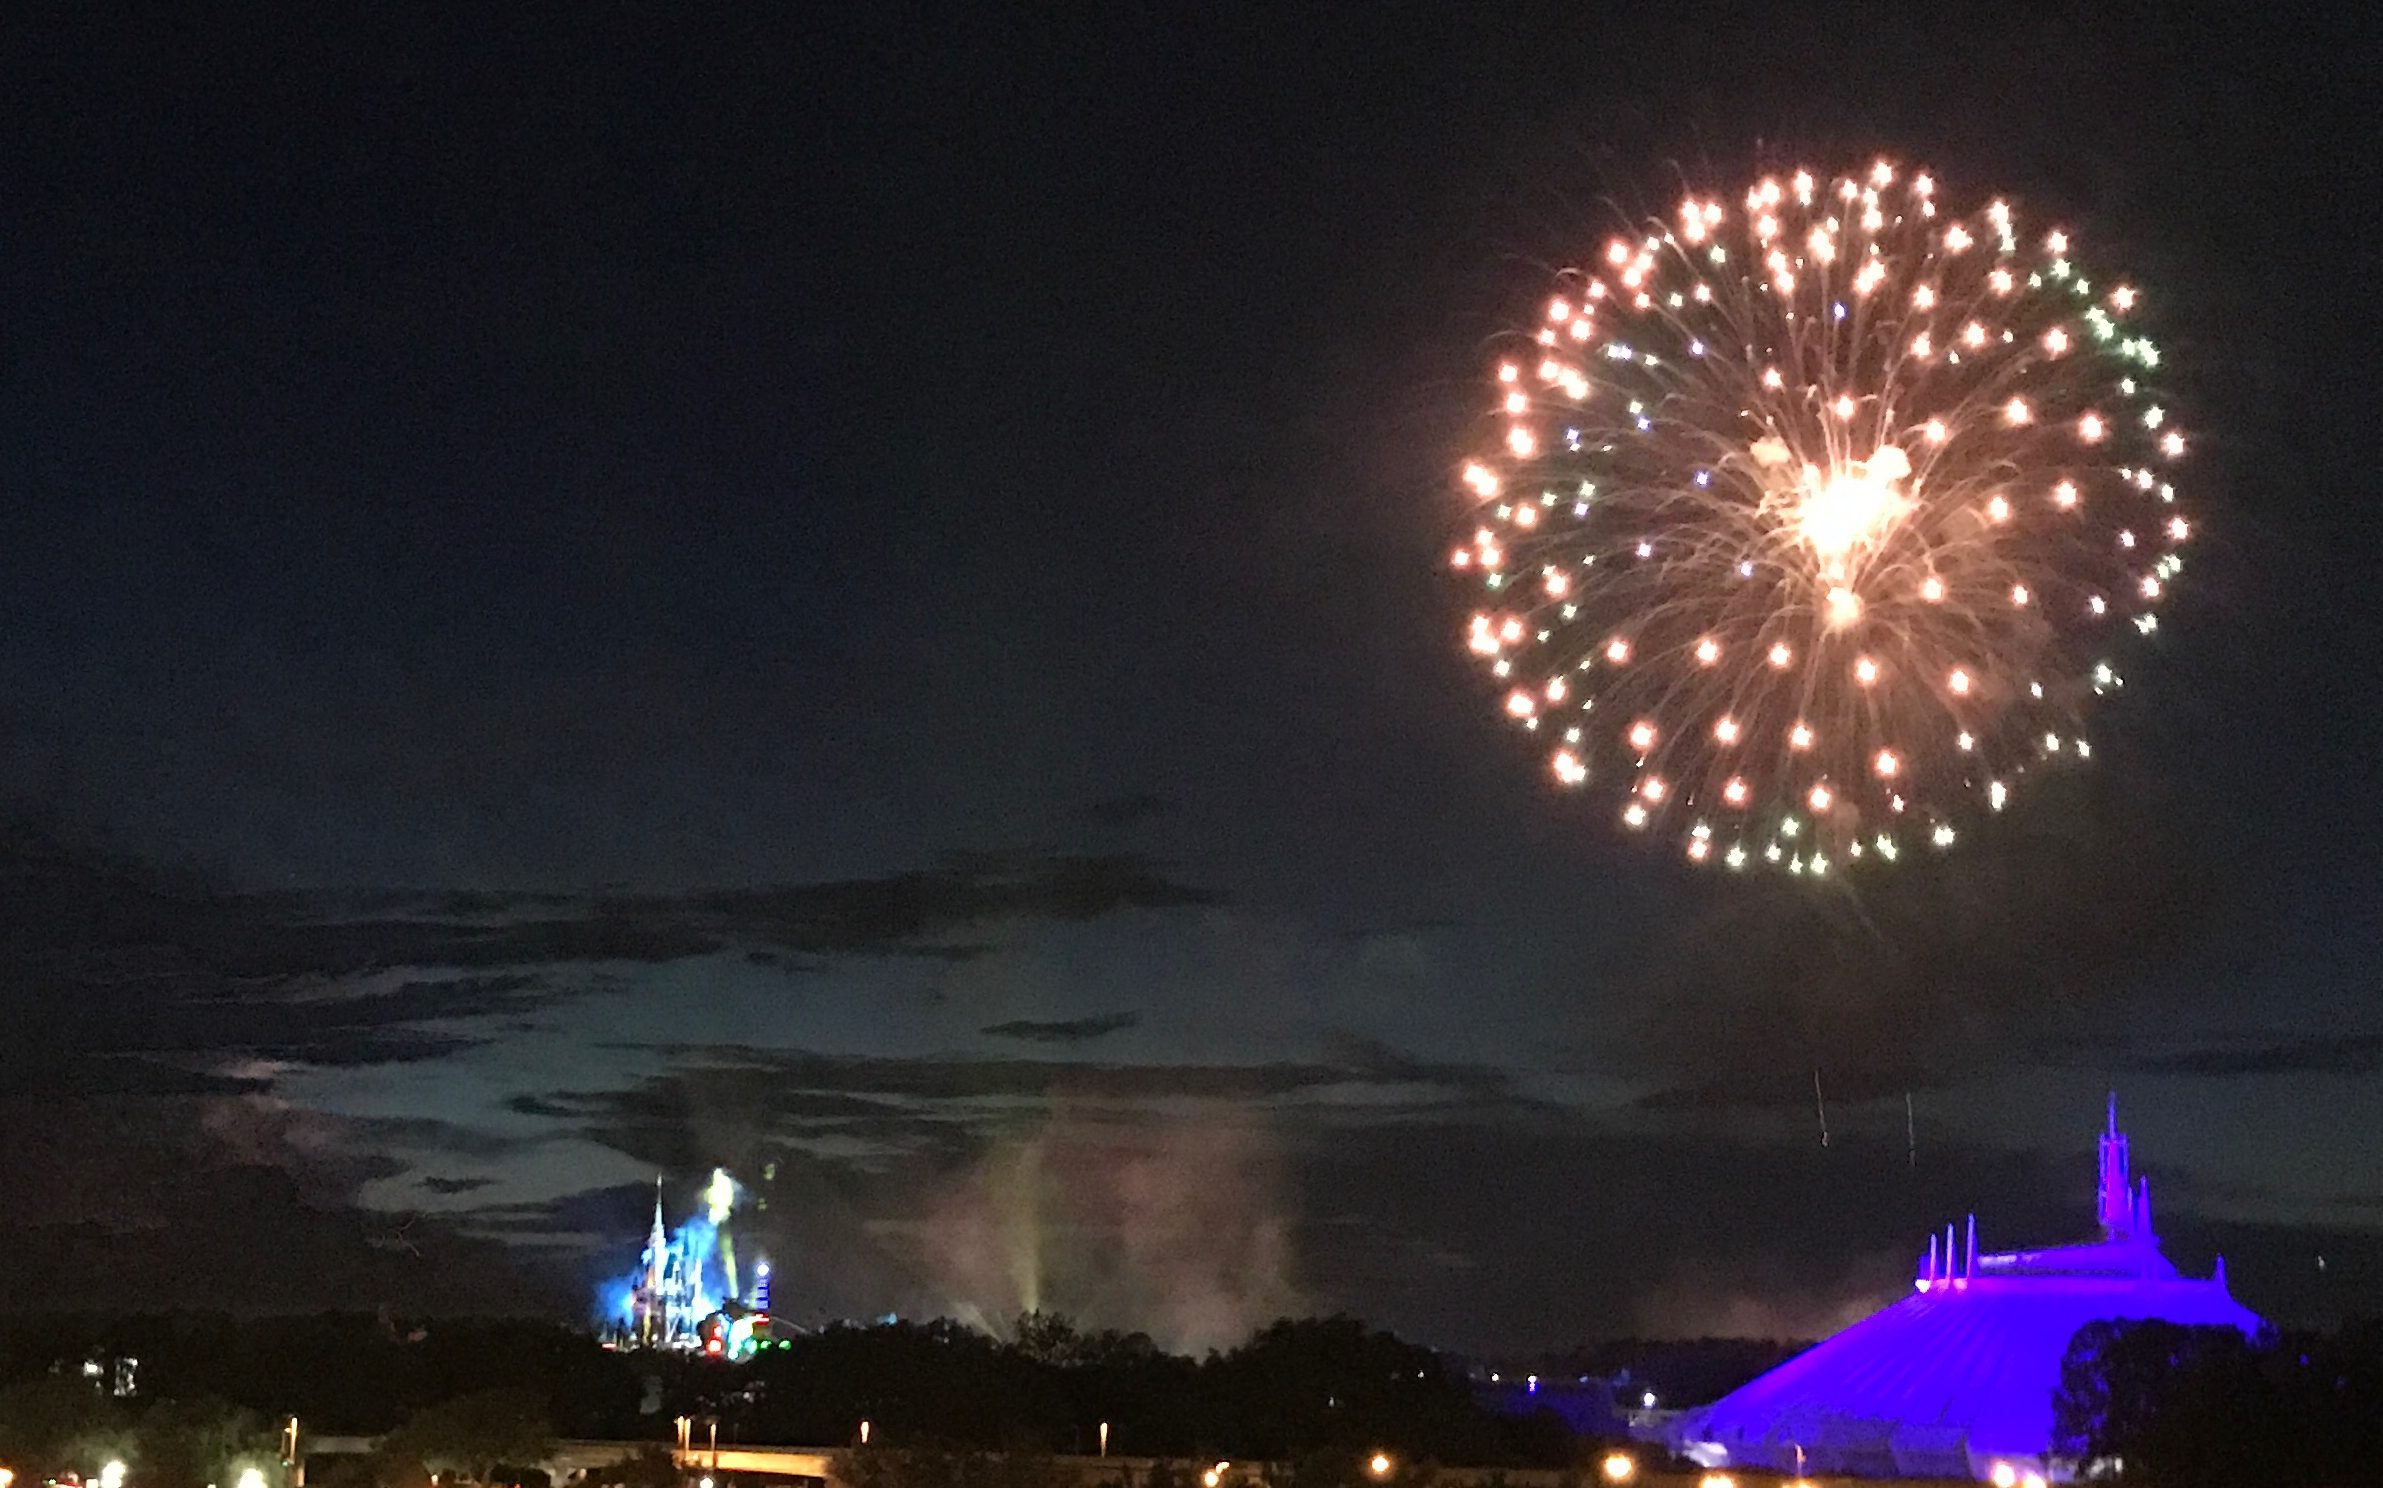 Highway in the Sky review: the night ends with fireworks from the Contemporary resort.